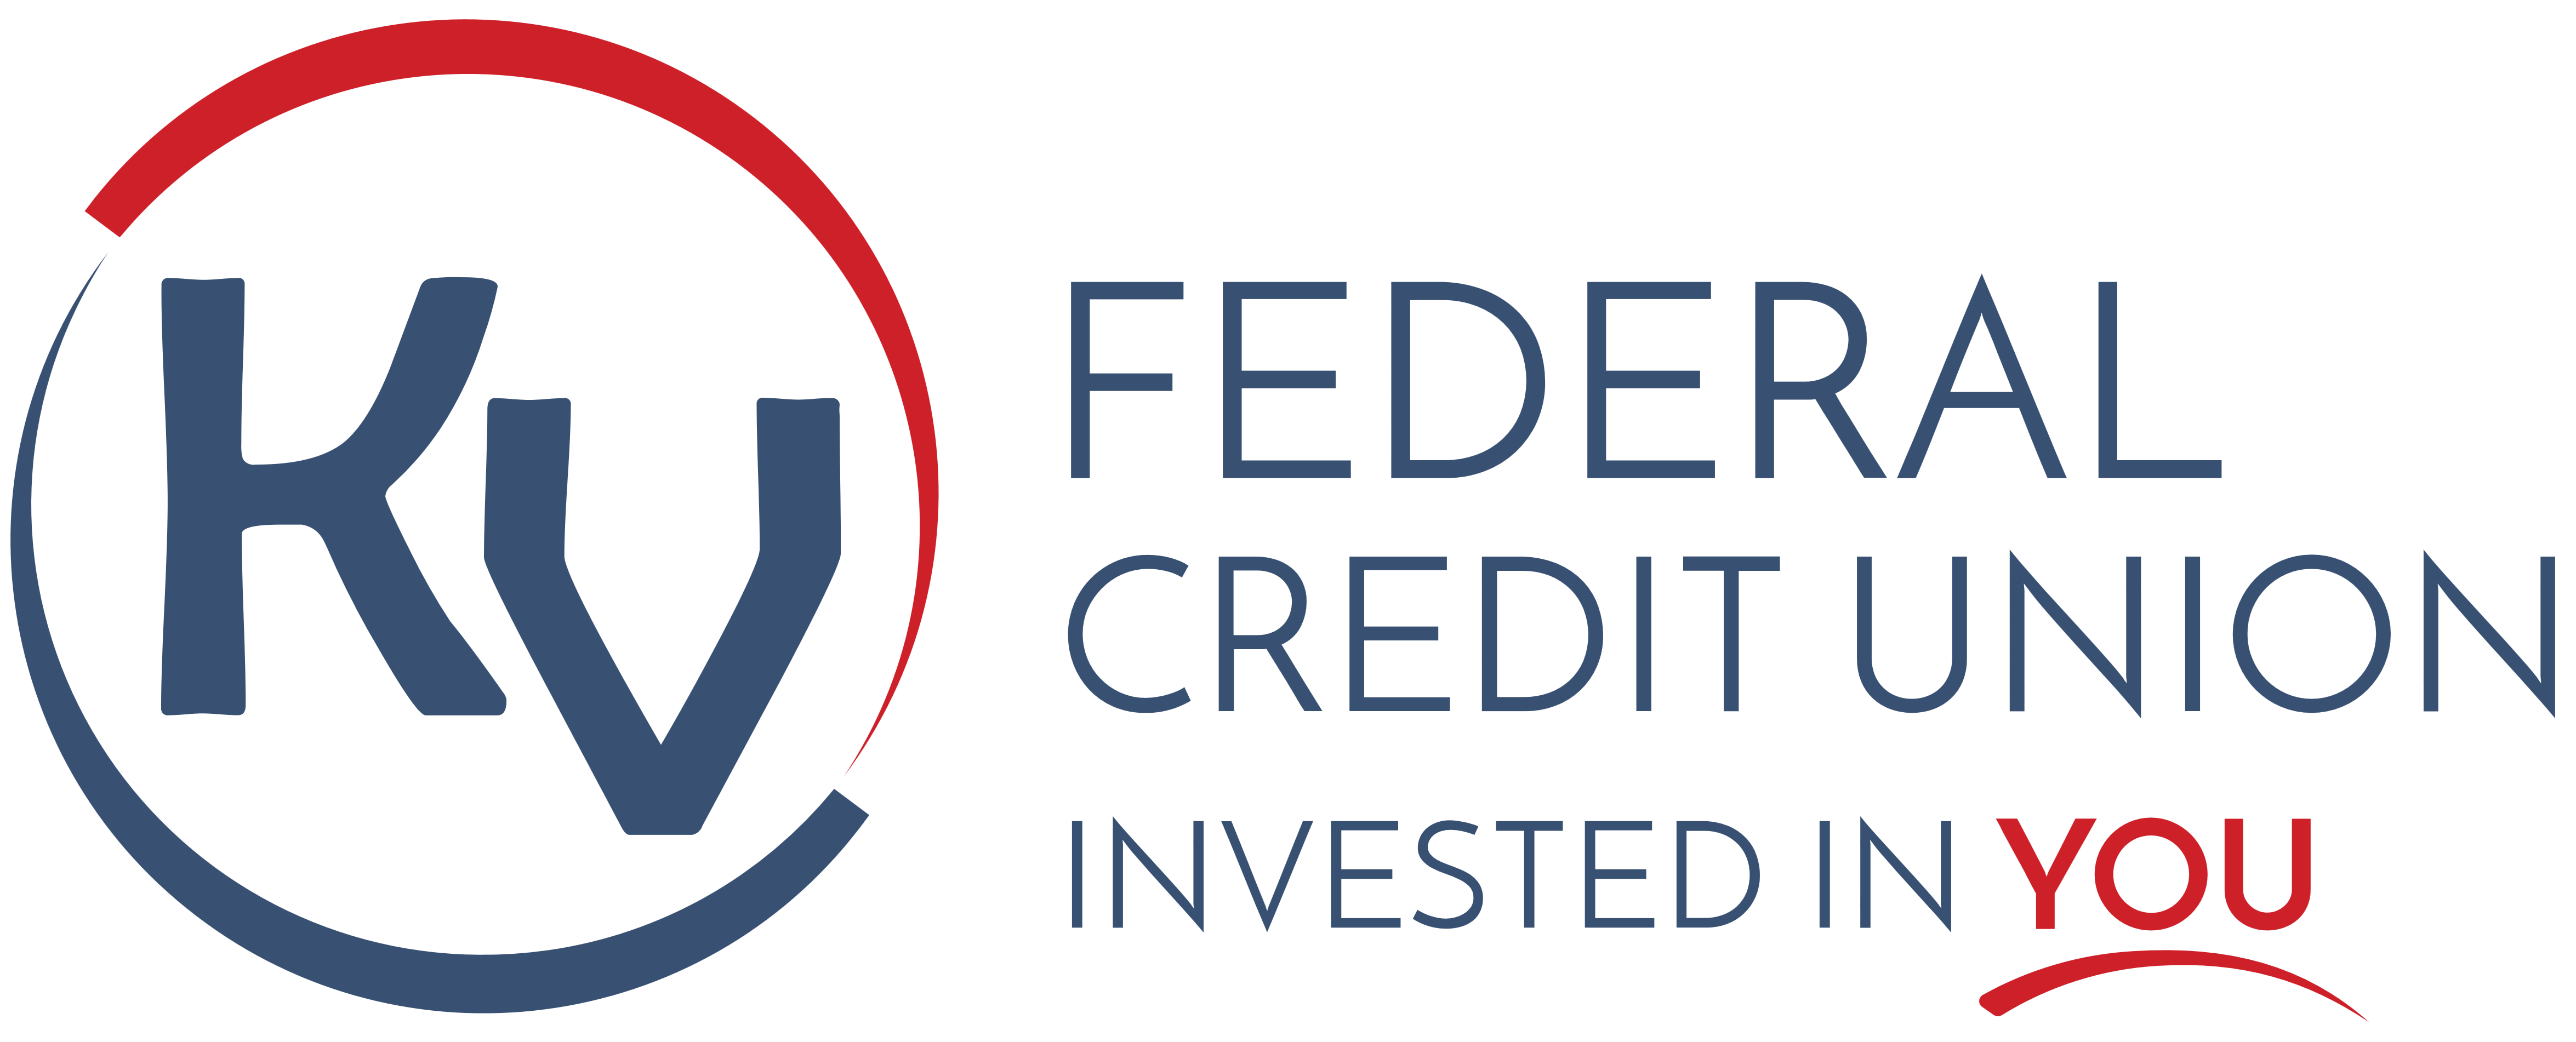 Befit federal credit union - bastainvestment